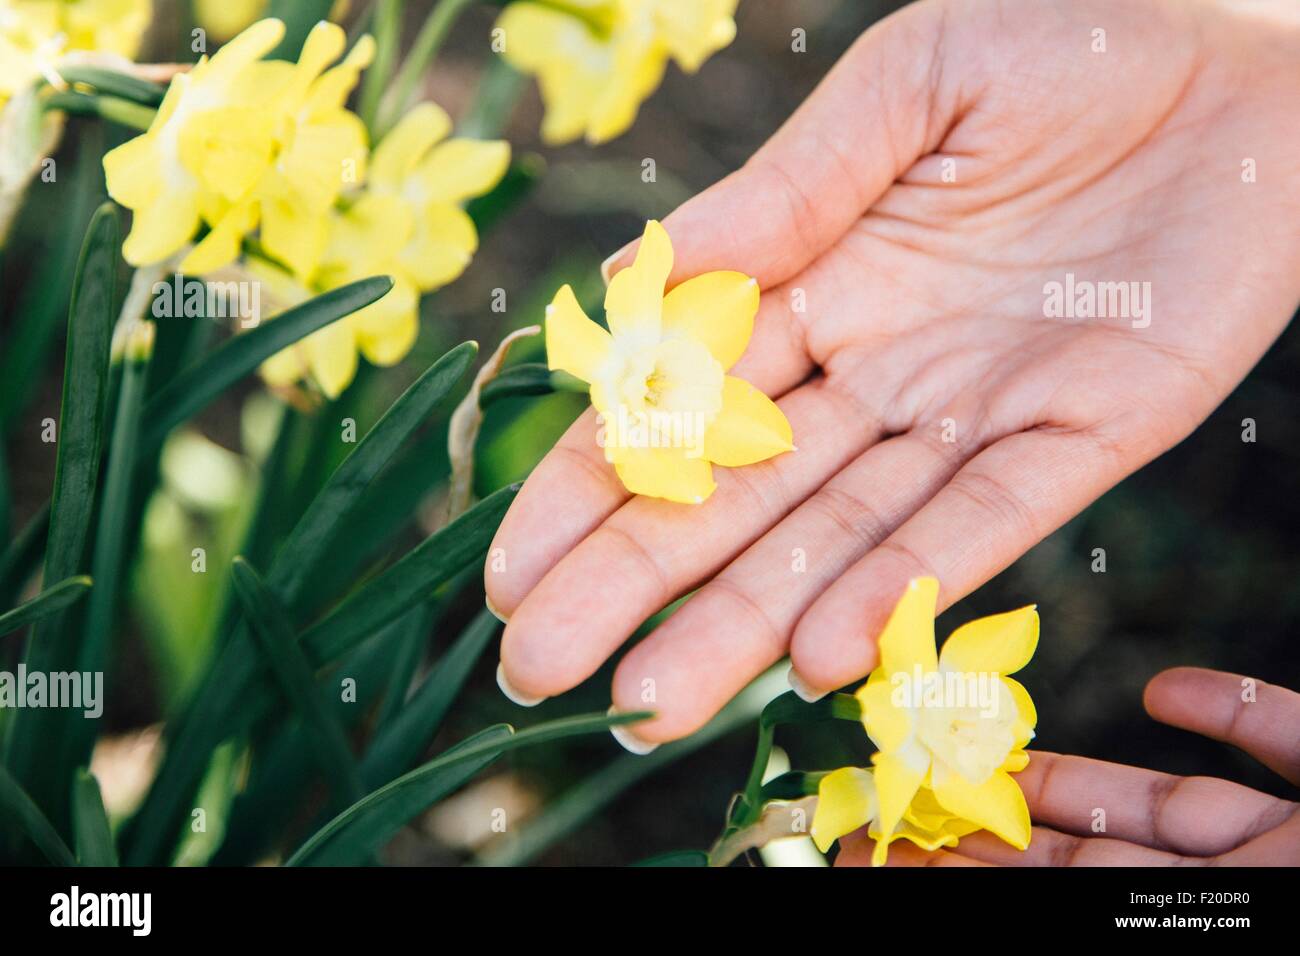 Cropped view of hands touching plant with yellow flowers Stock Photo